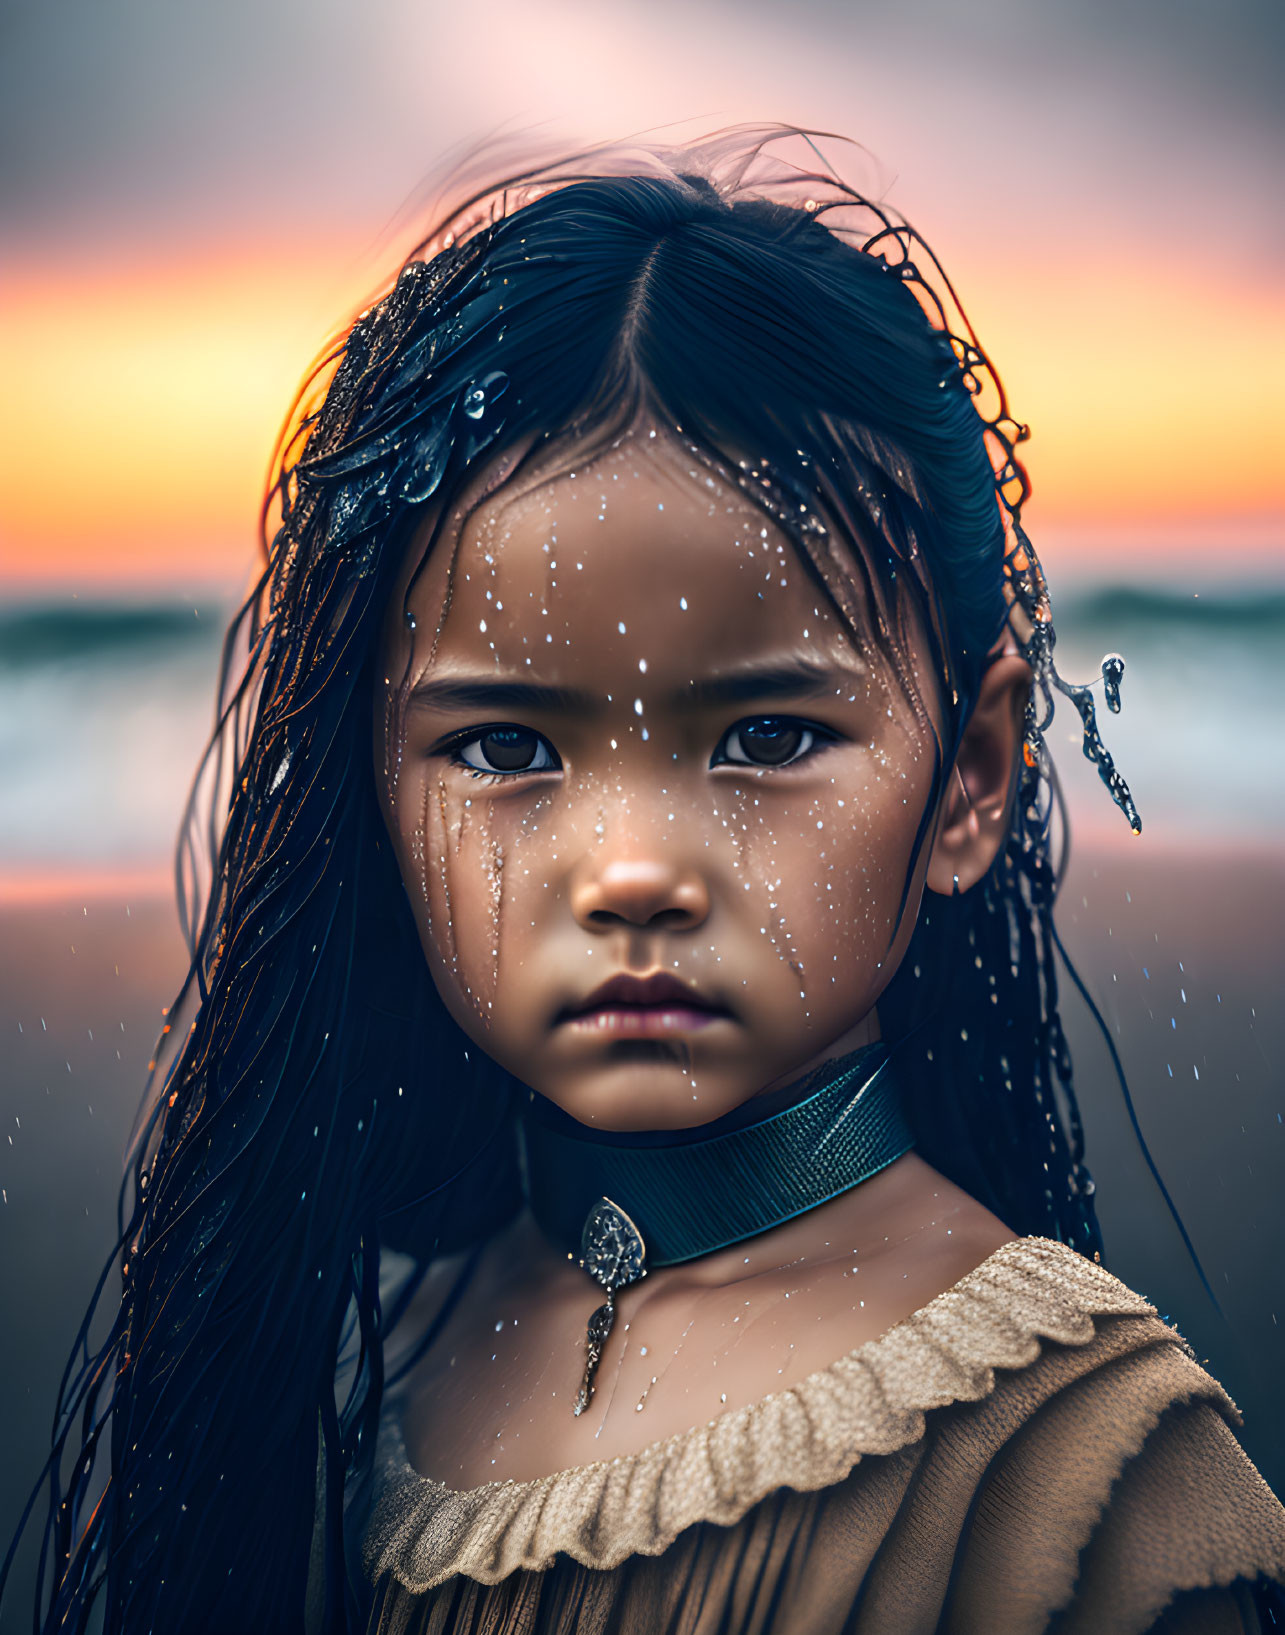 Girl with Wet Hair and Water Droplets in Brown Top at Sunset Beach